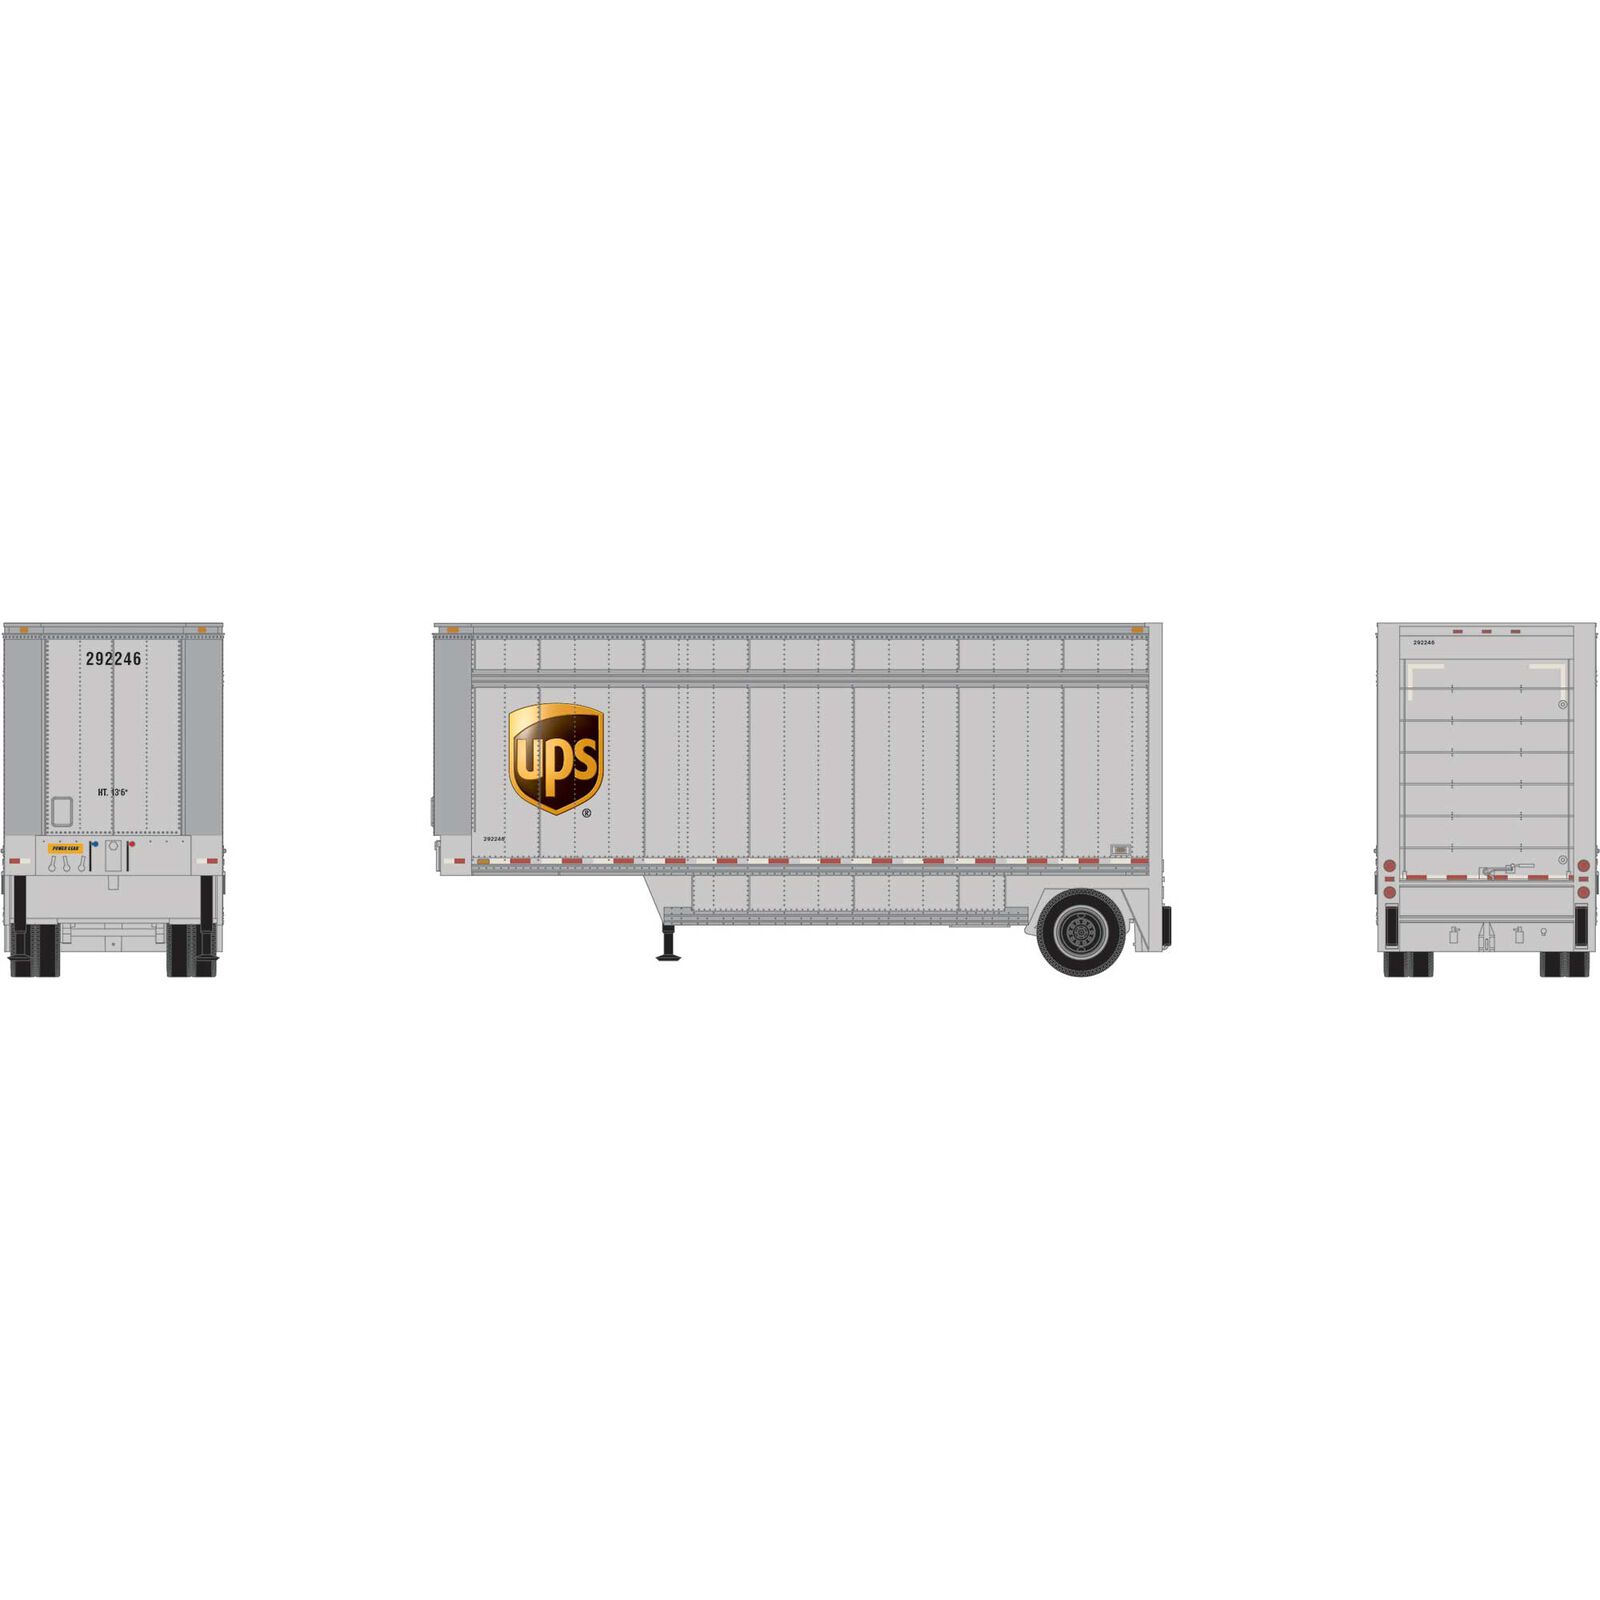 HO RTR 28' Drop Sill Trailer UPS with Shield #292246